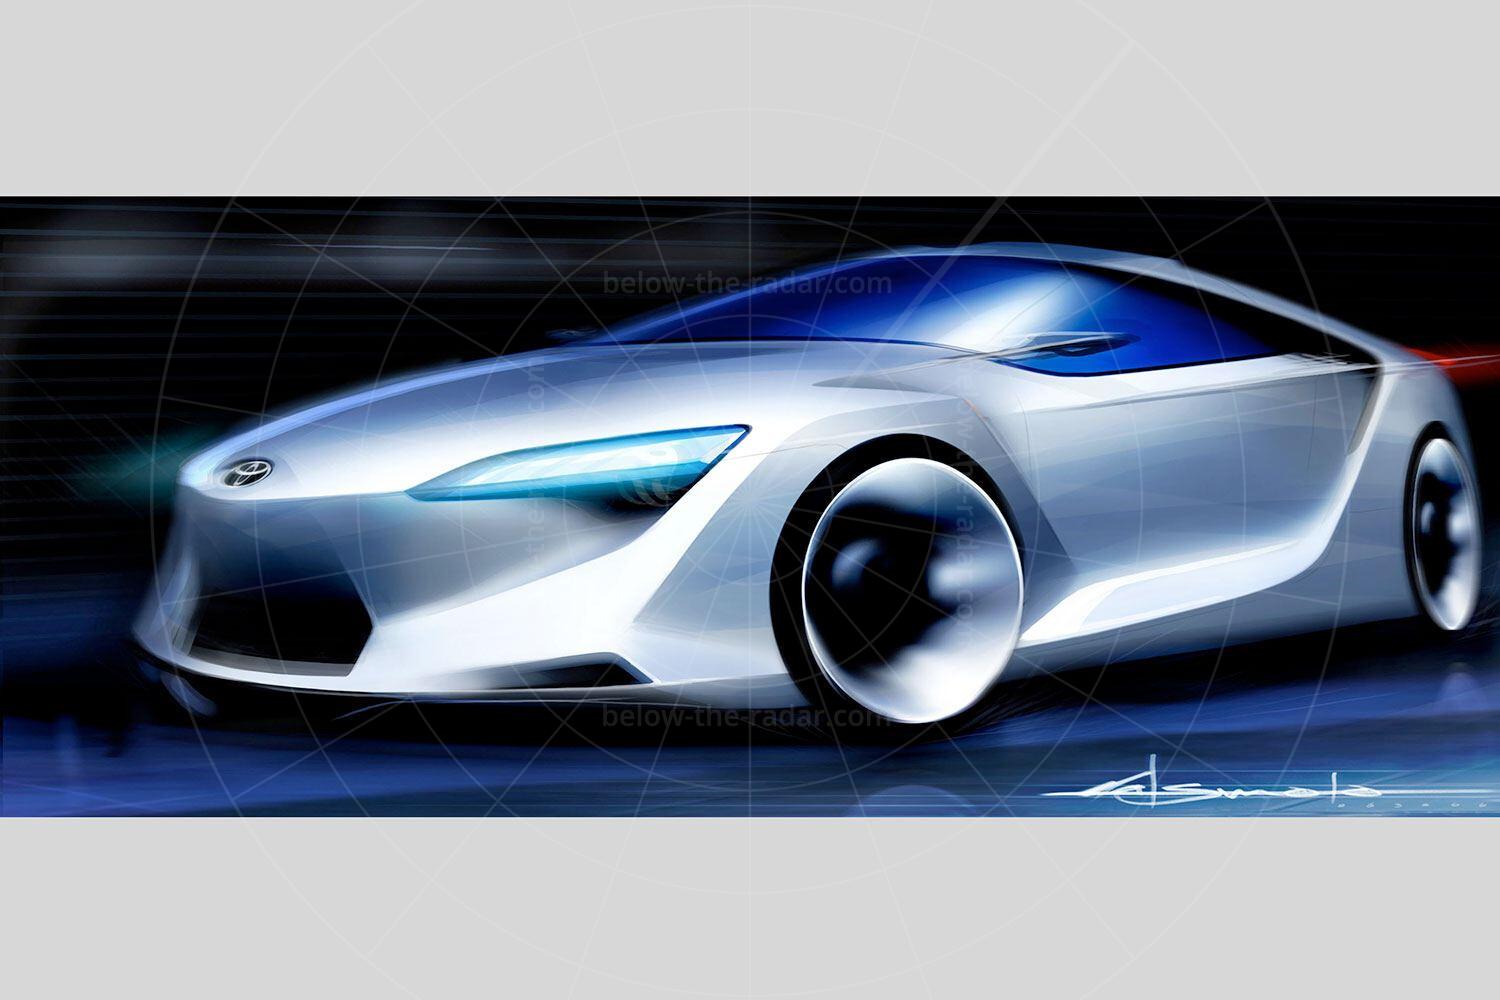 Toyota FT-HS concept design sketch Pic: Toyota | Toyota FT-HS concept design sketch